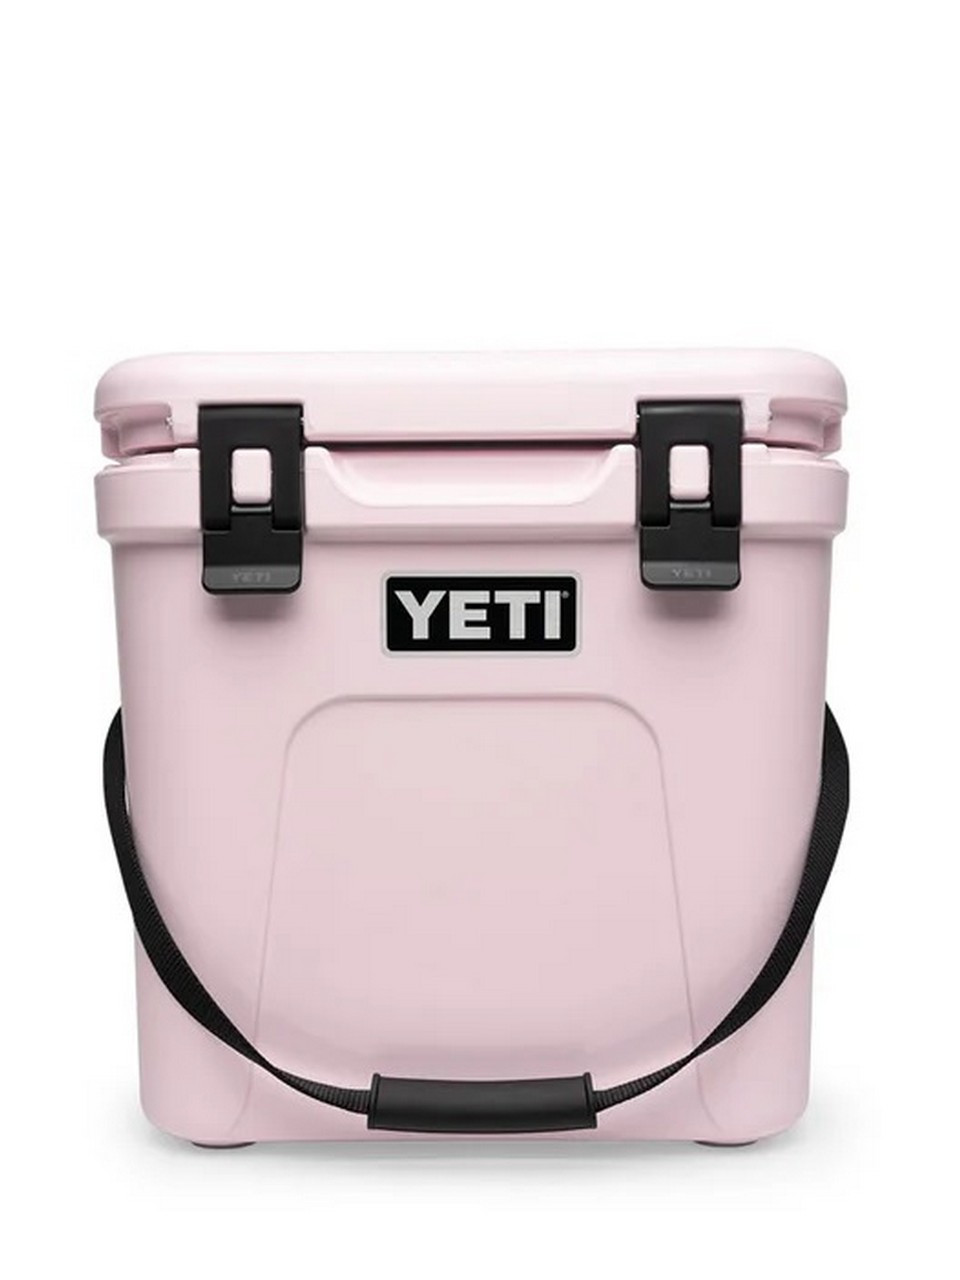 Yeti Hard Cooler 35 Tundra, Limited Edition Breast Cancer Pink